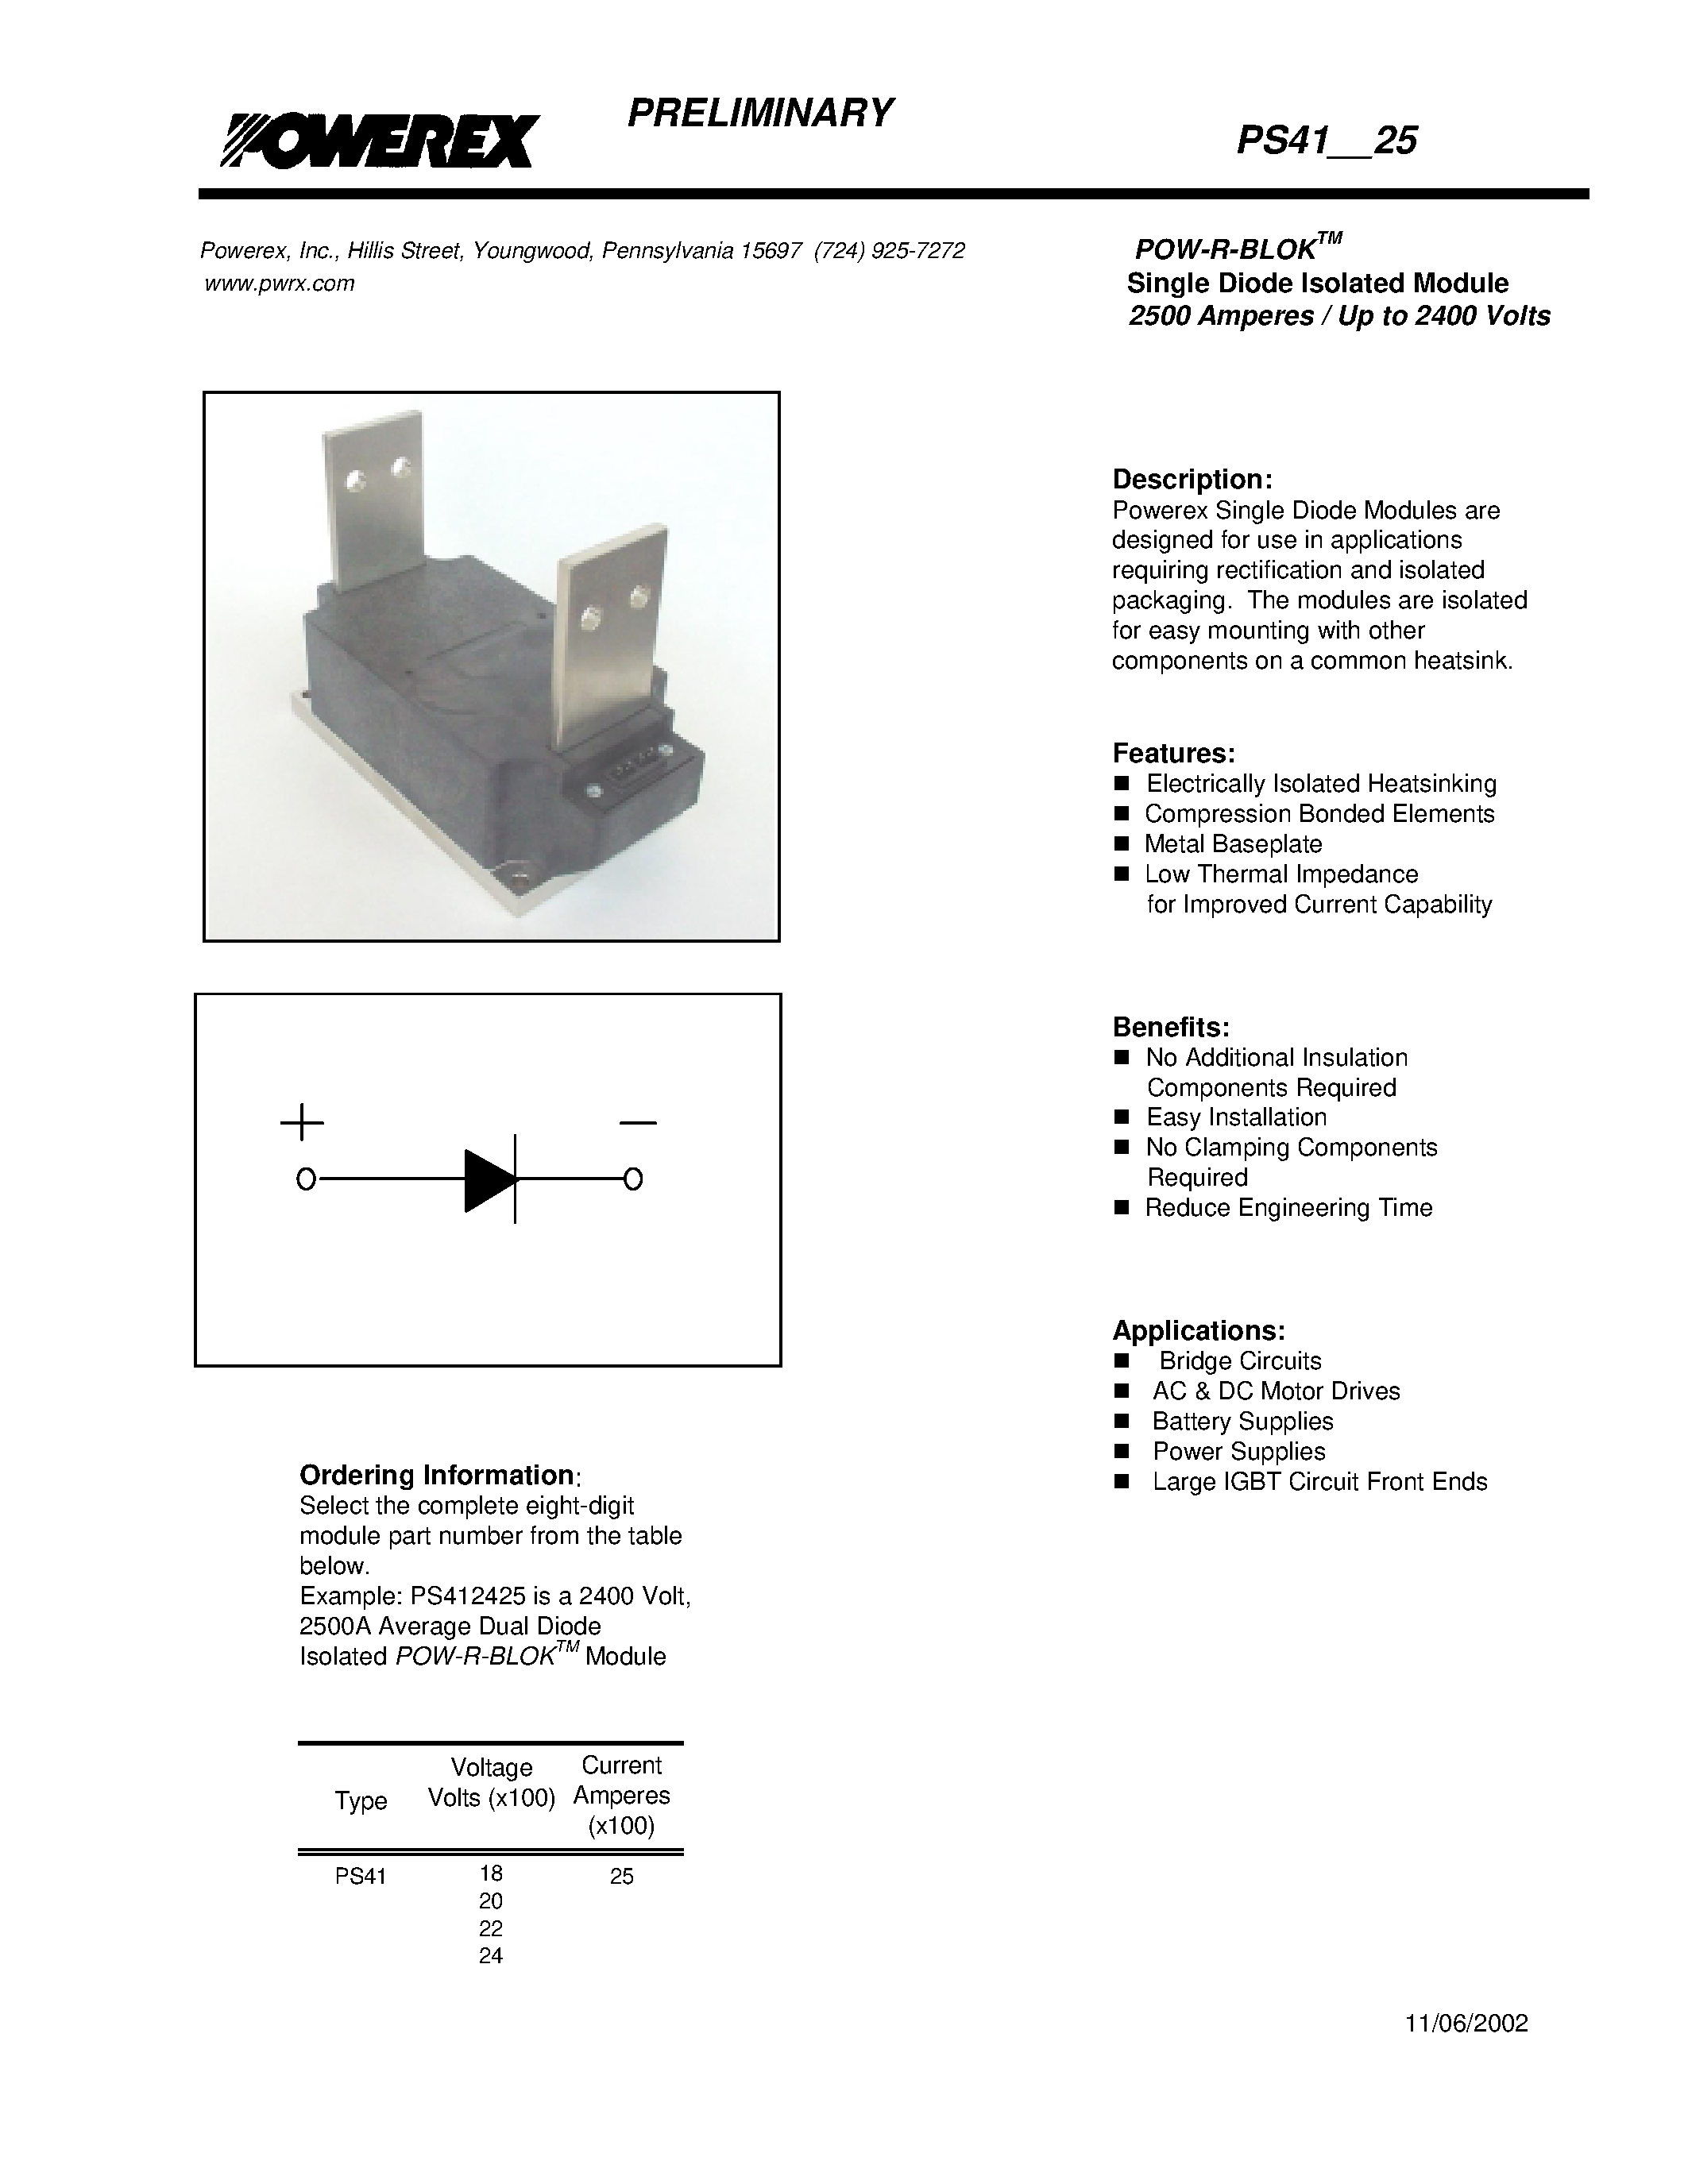 Datasheet P411825 - POW-R-BLOK Single Diode Isolated Module (2500 Amperes / Up to 2400 Volts) page 1